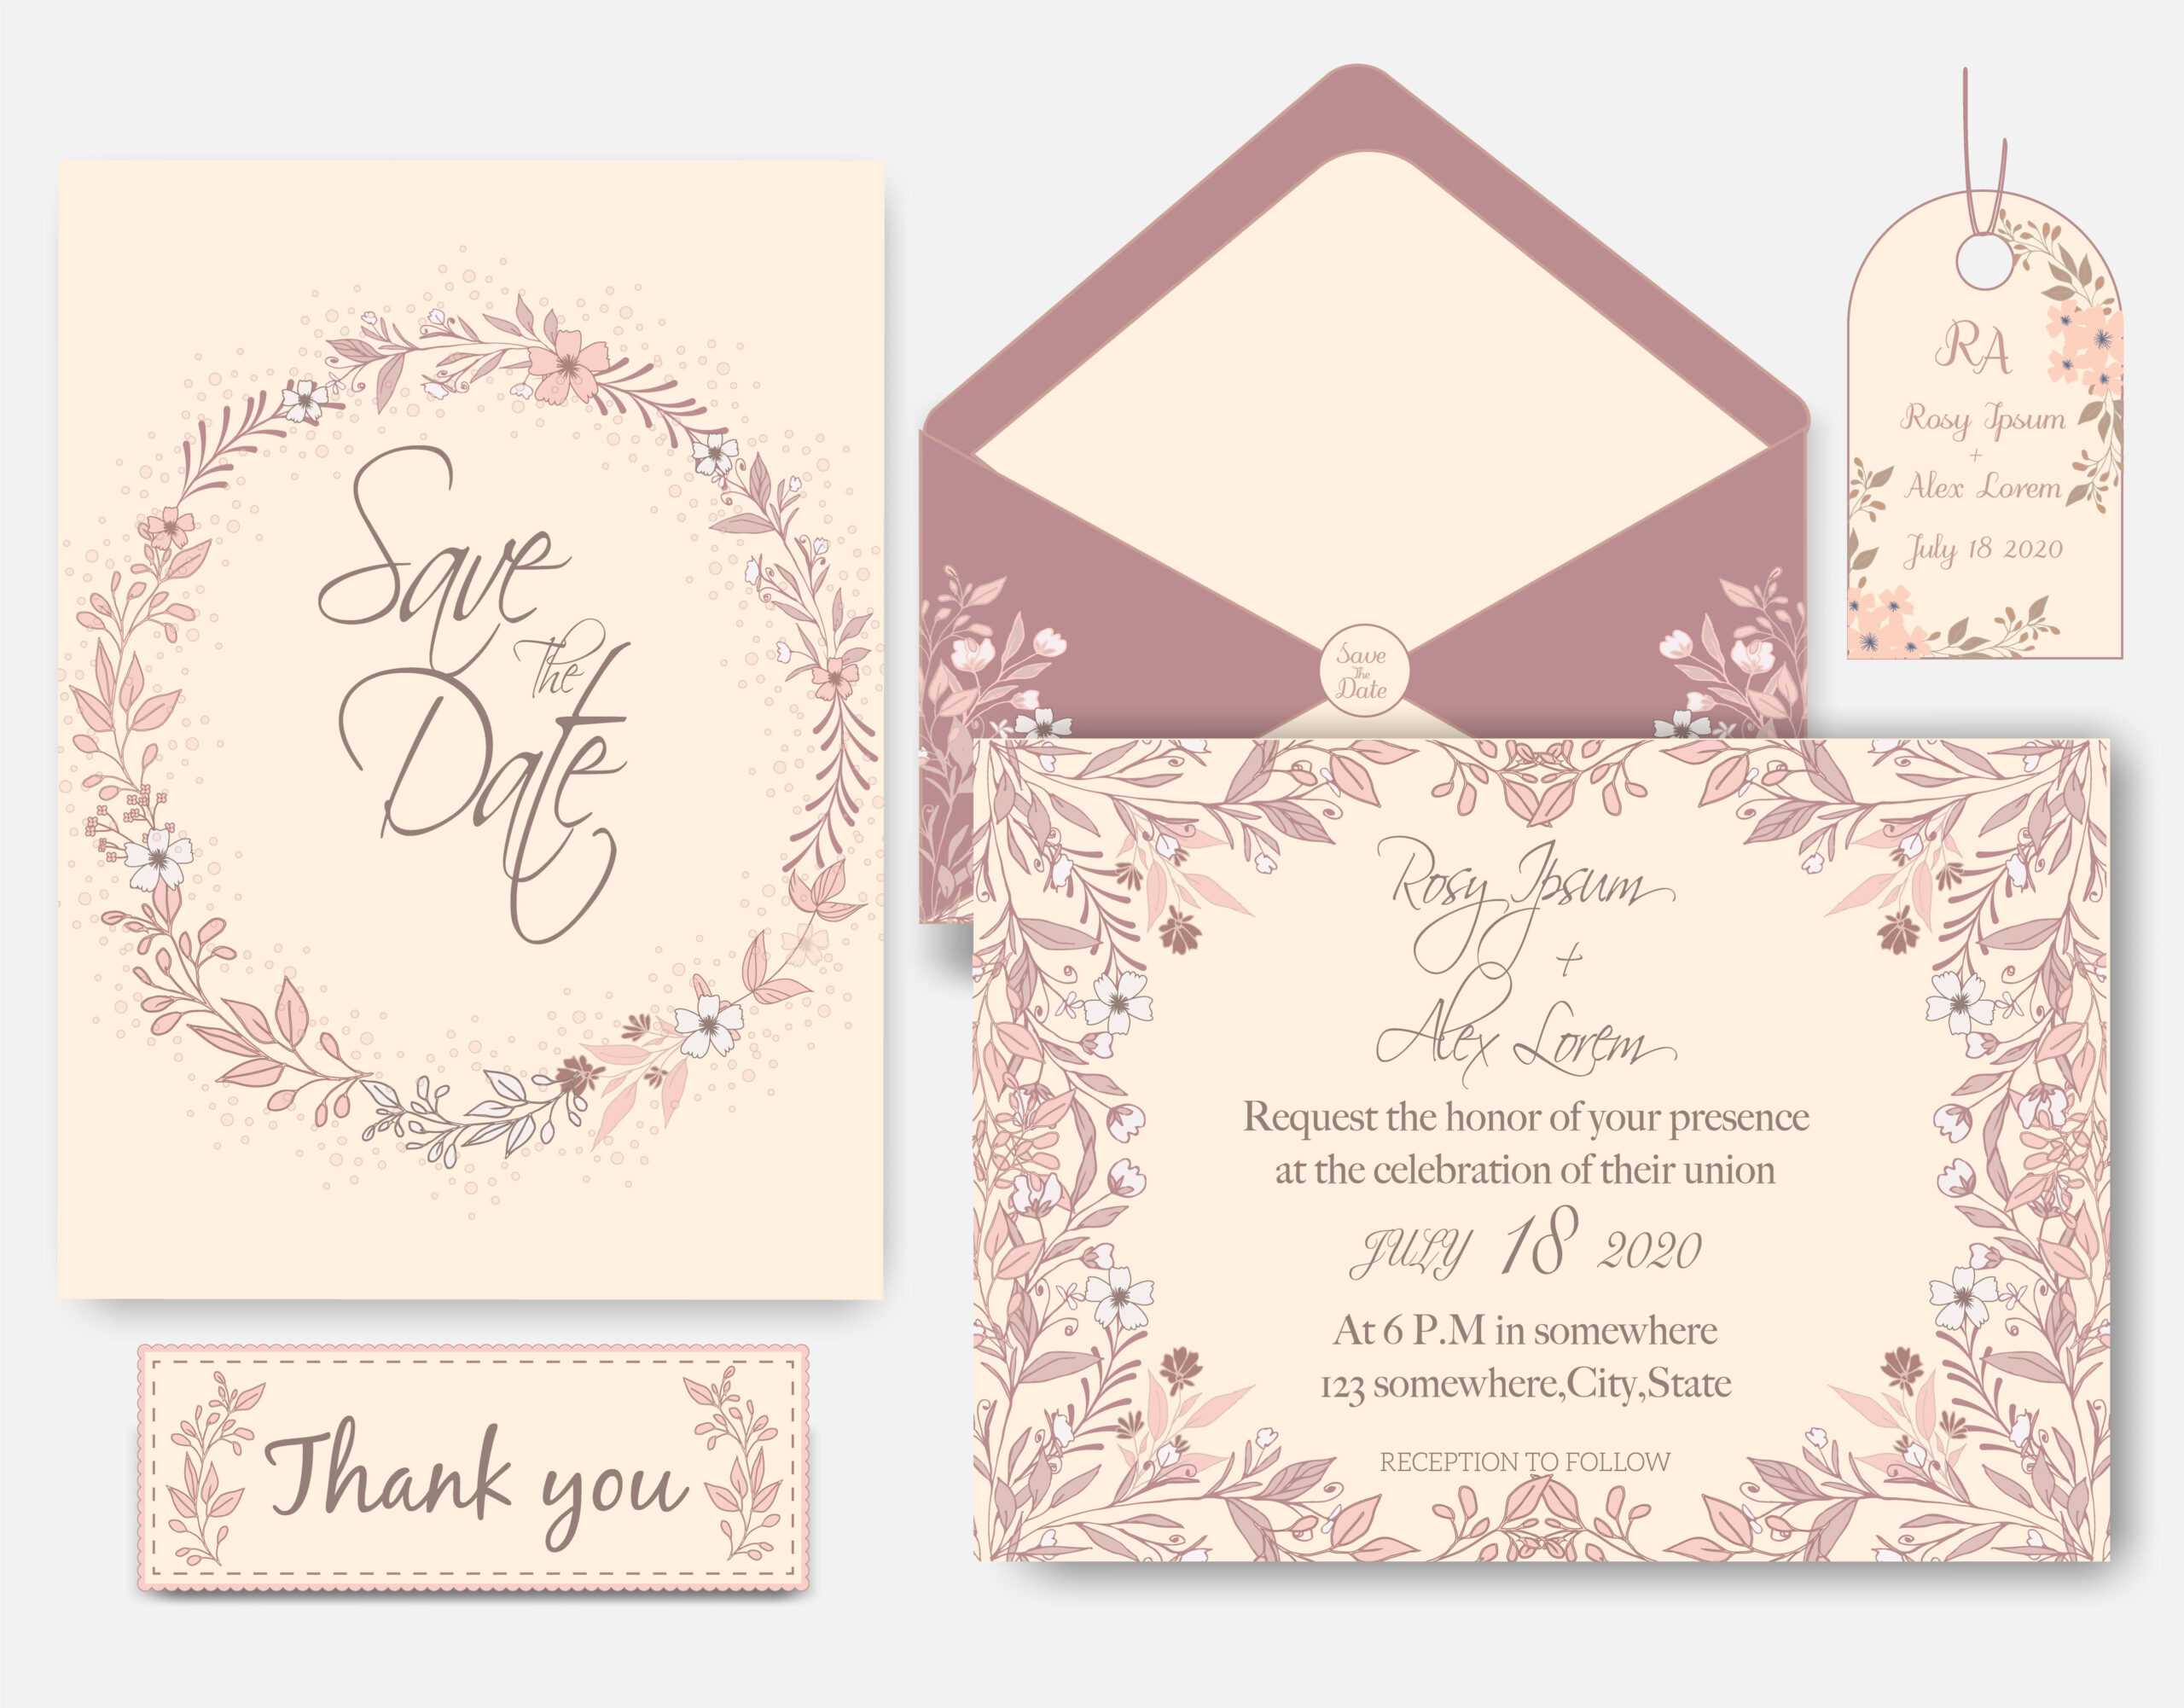 Wedding Invitation Card With Flower Templates – Download For Celebrate It Templates Place Cards